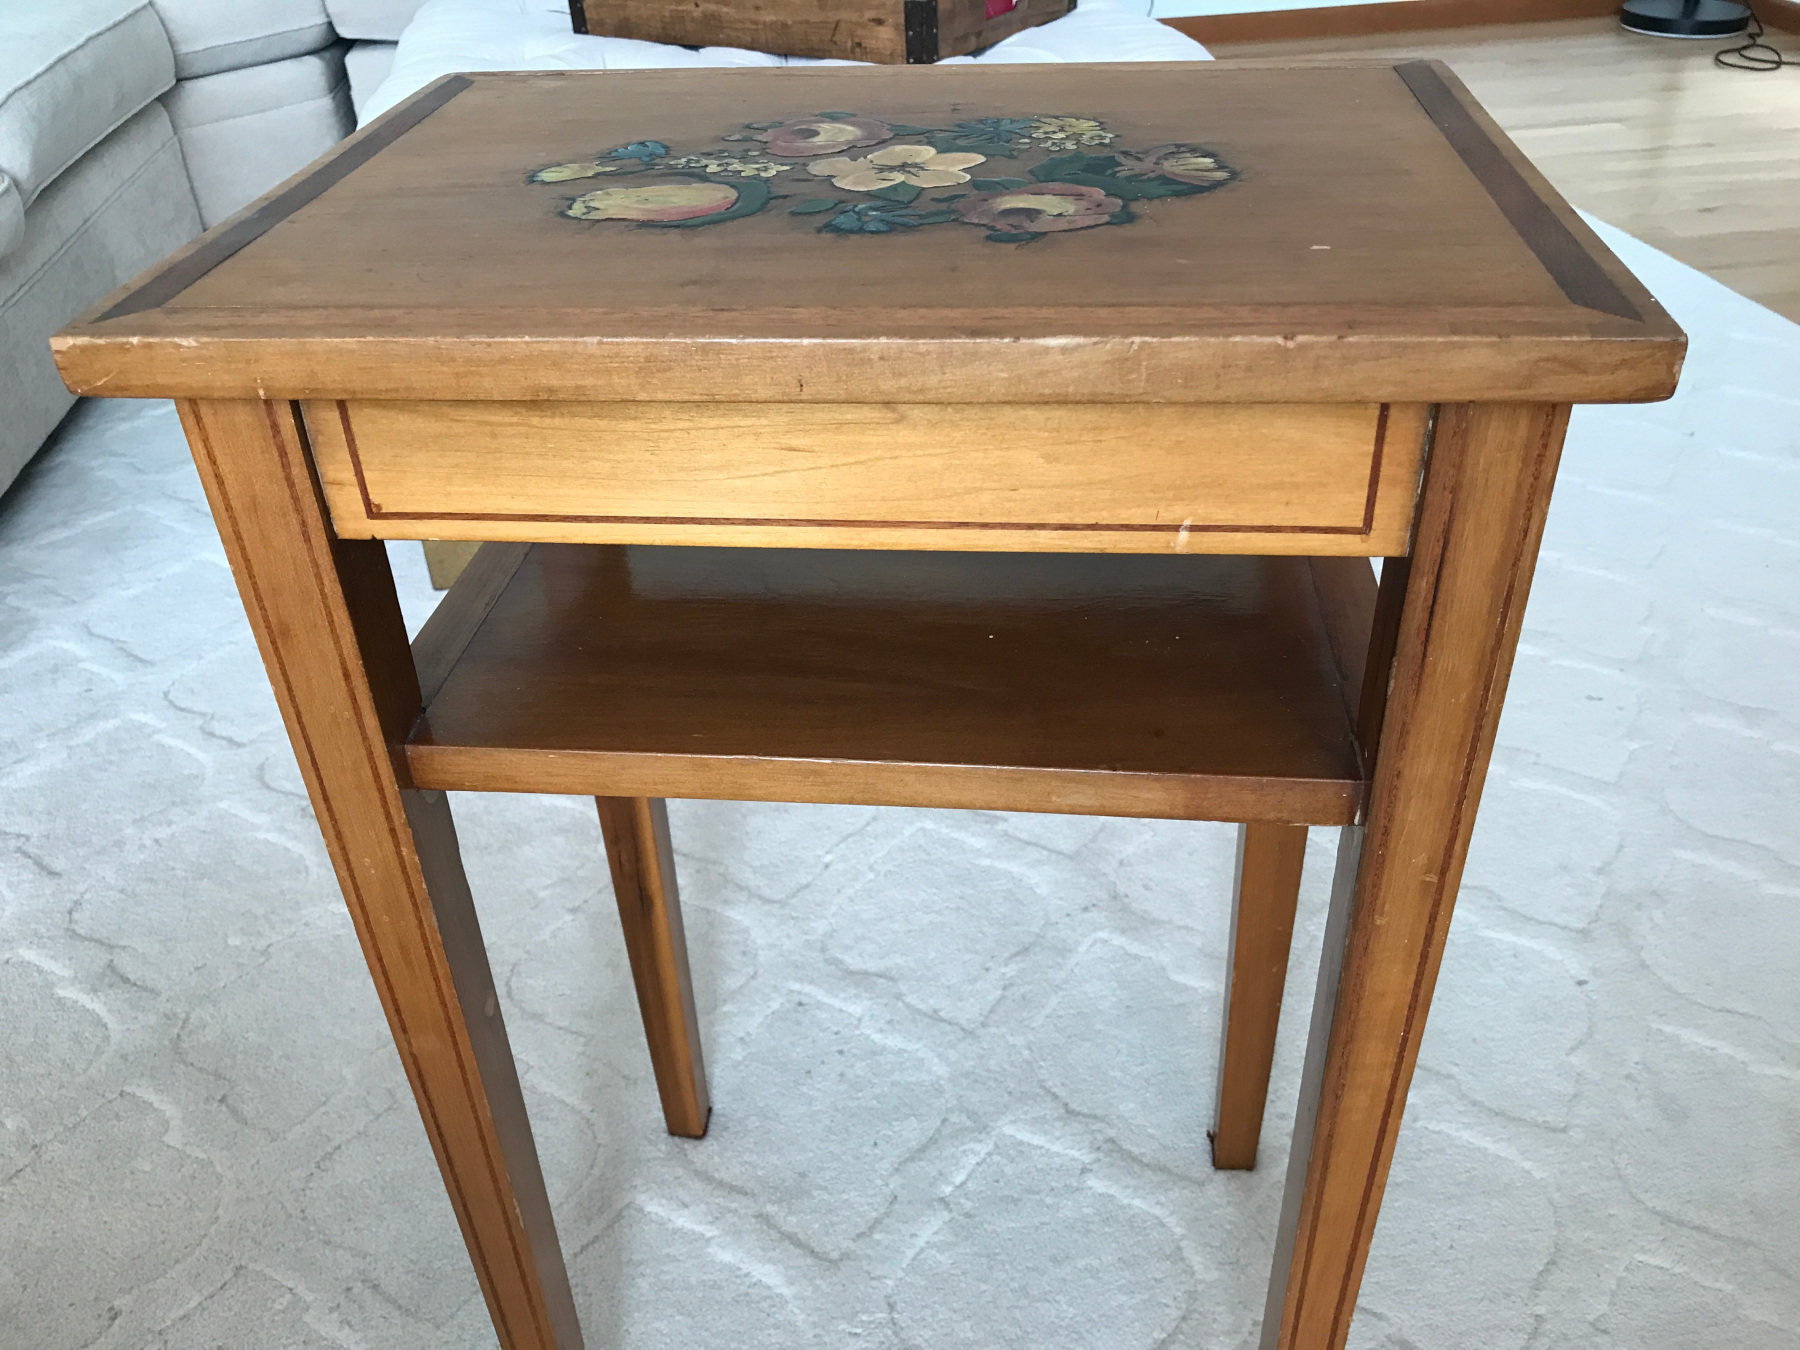 Nesting Tables front view